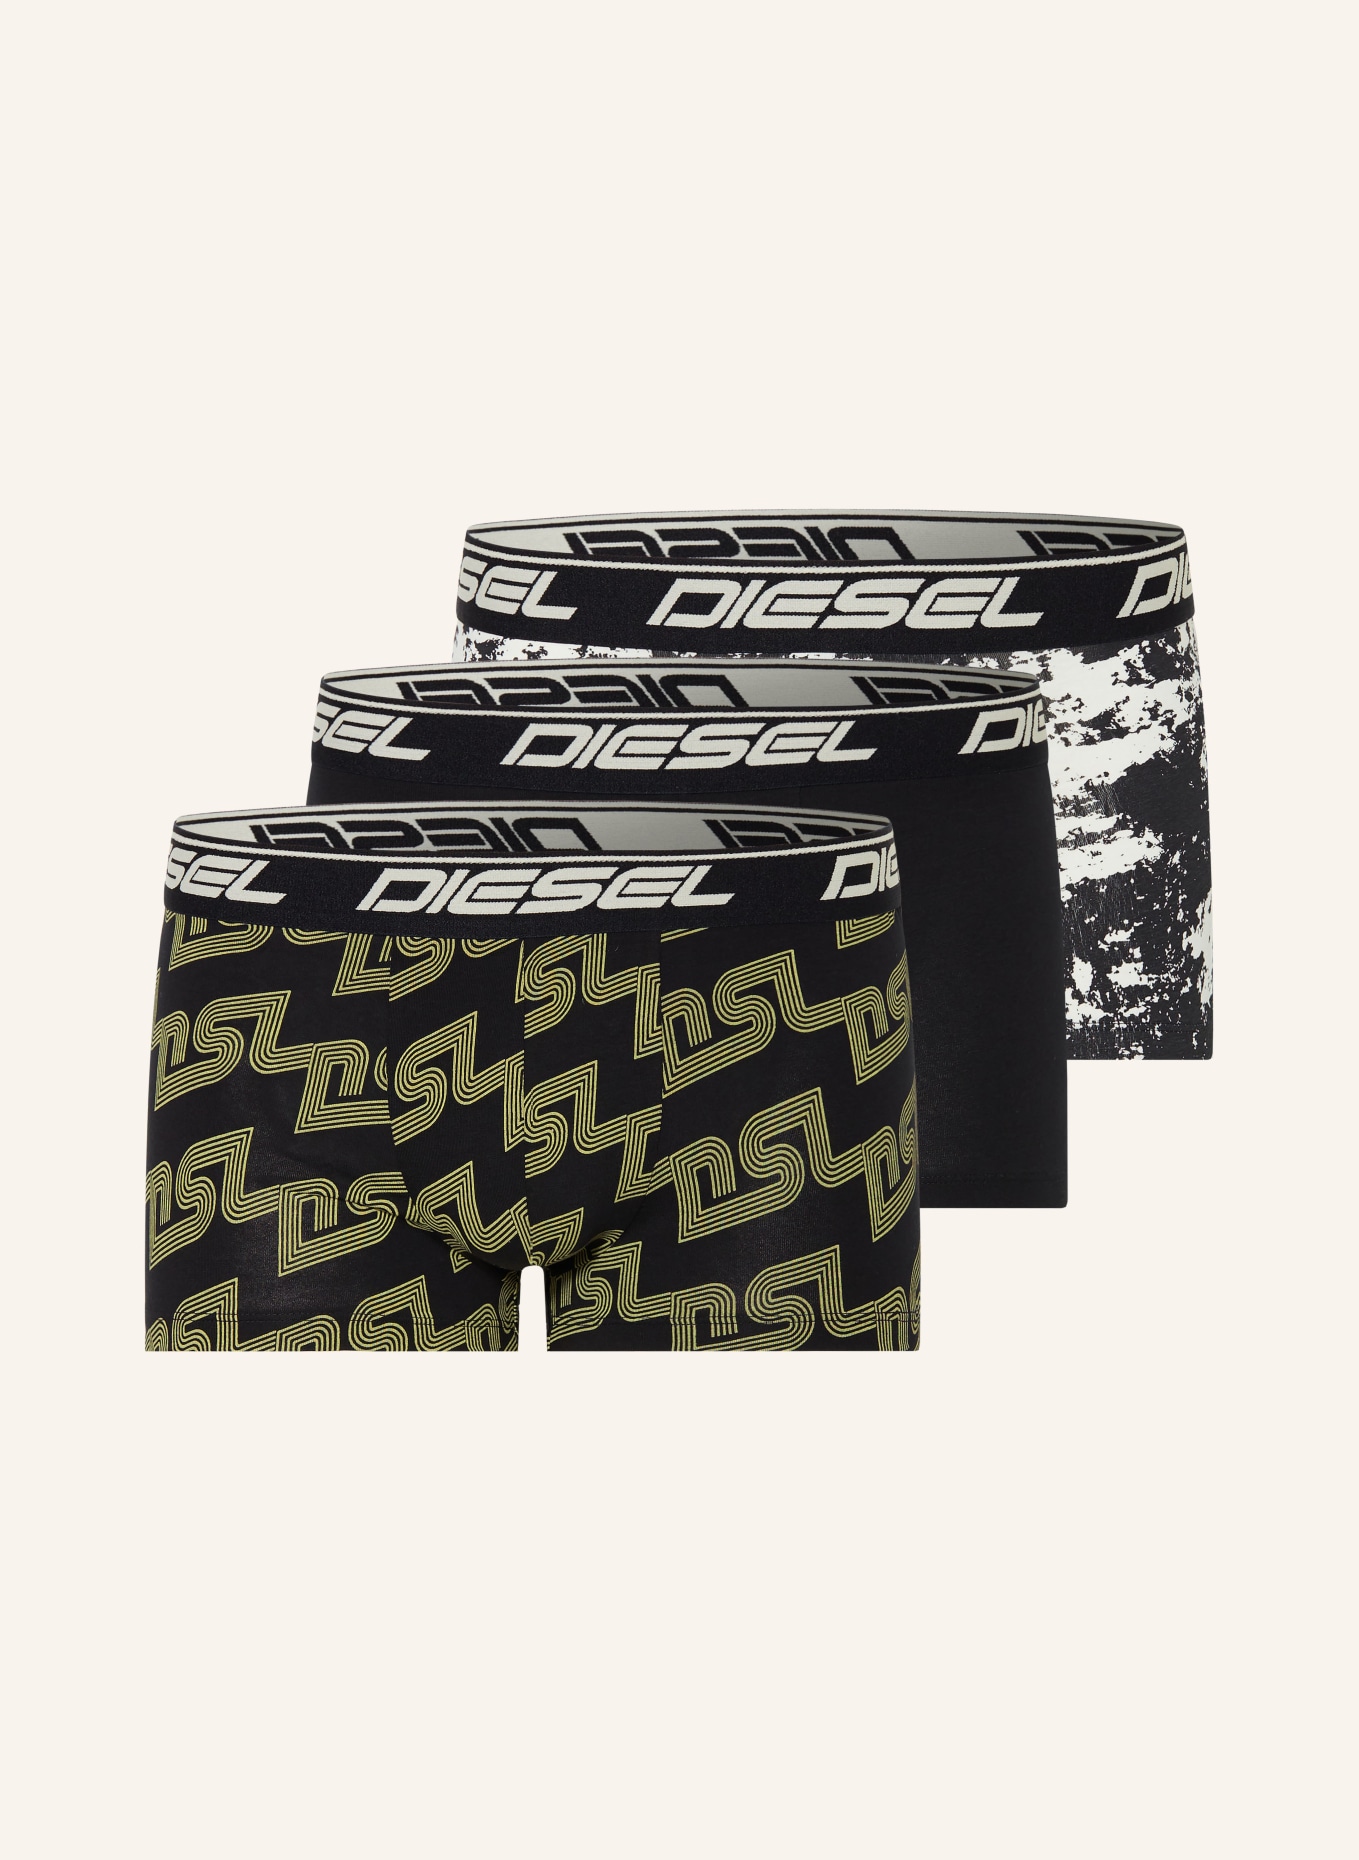 DIESEL 3-pack boxer shorts DAMIEN, Color: BLACK/ WHITE/ YELLOW (Image 1)